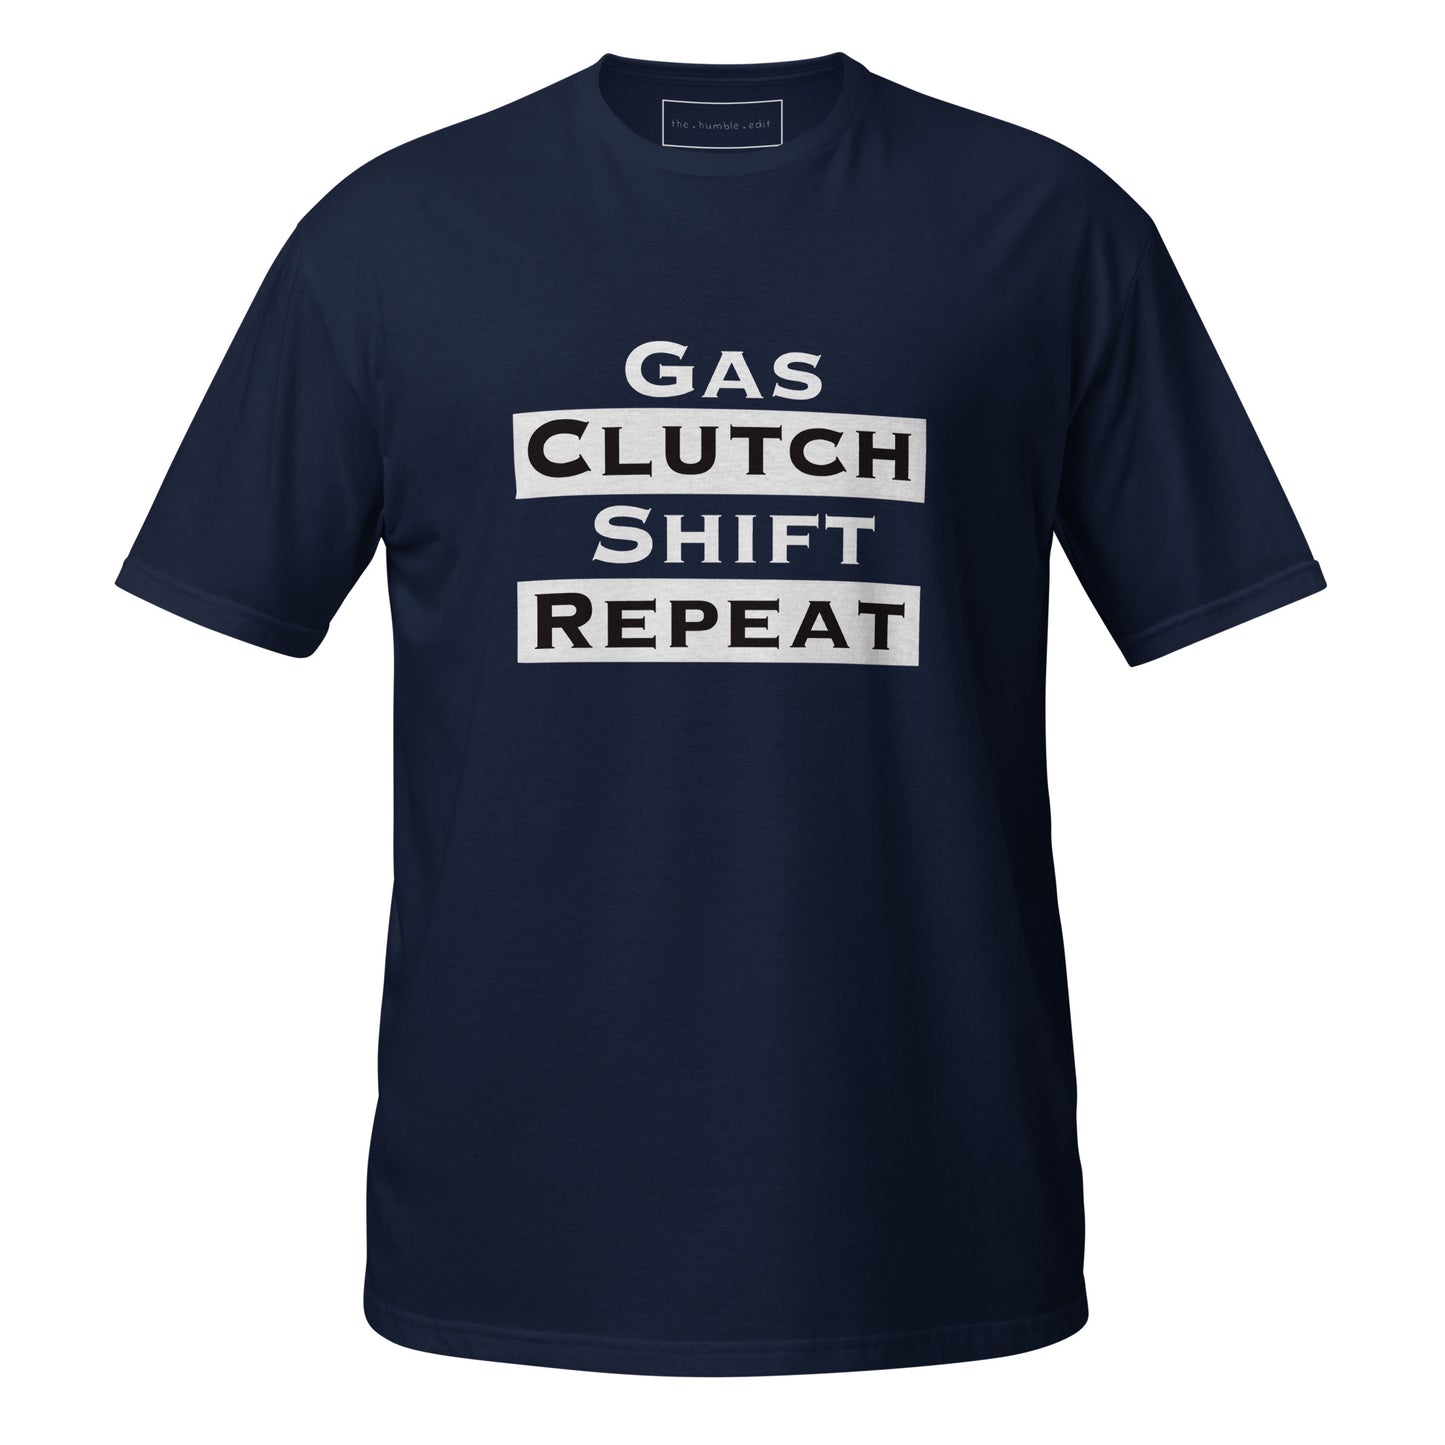 Gas, Clutch, Shift & Repeat - Unisex SoftStyle T-Shirt